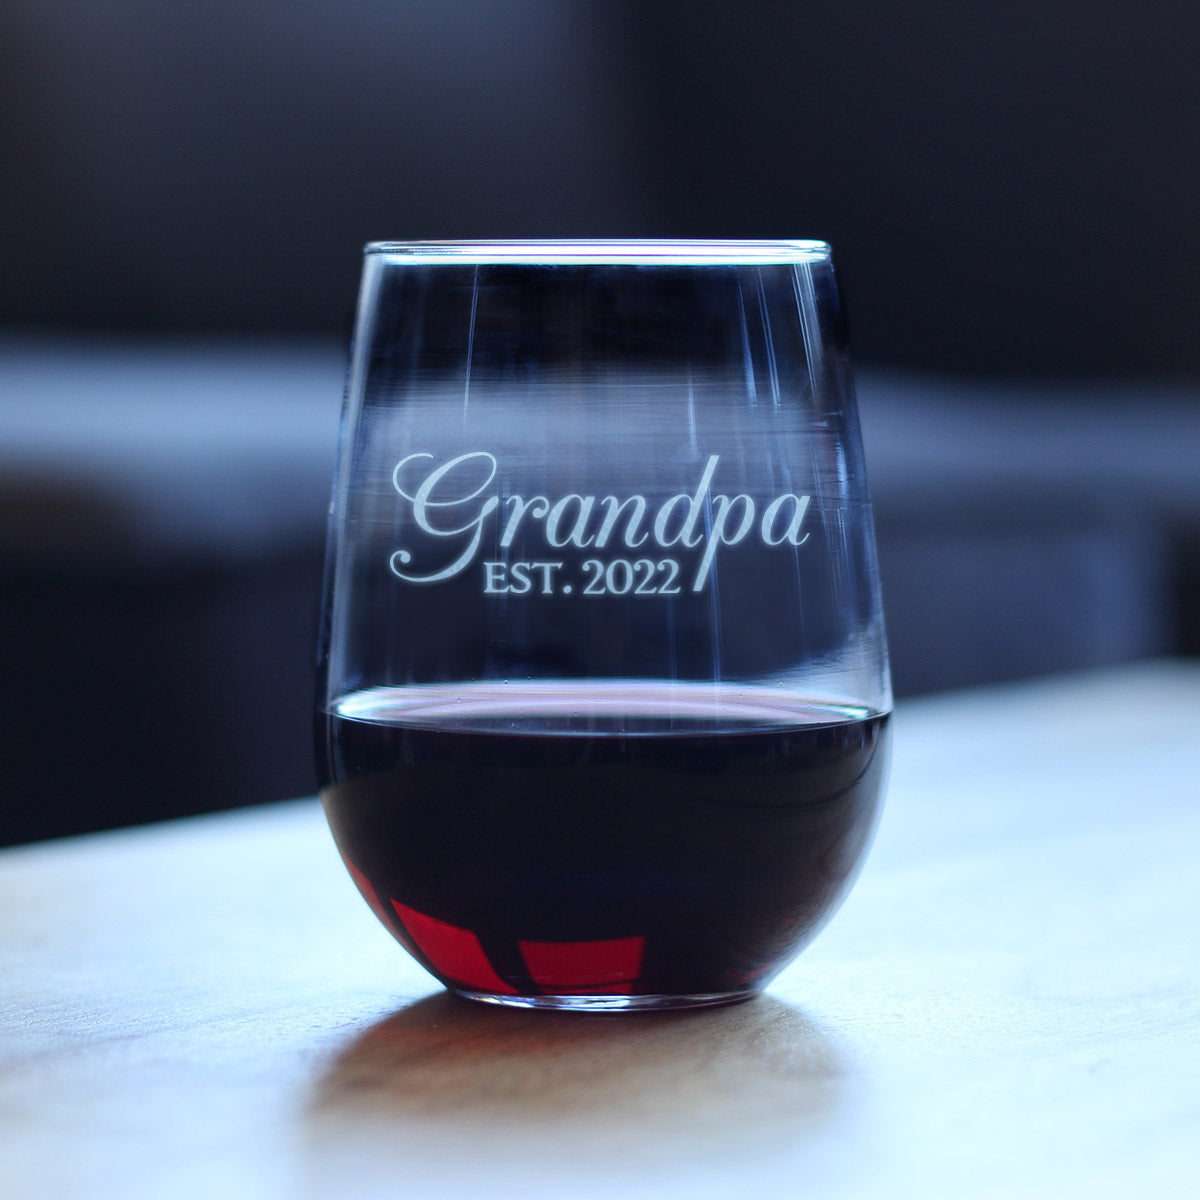 Grandpa Est 2022 - New Grandfather Stemless Wine Glass Gift for First Time Grandparents - Decorative 17 Oz Large Glasses